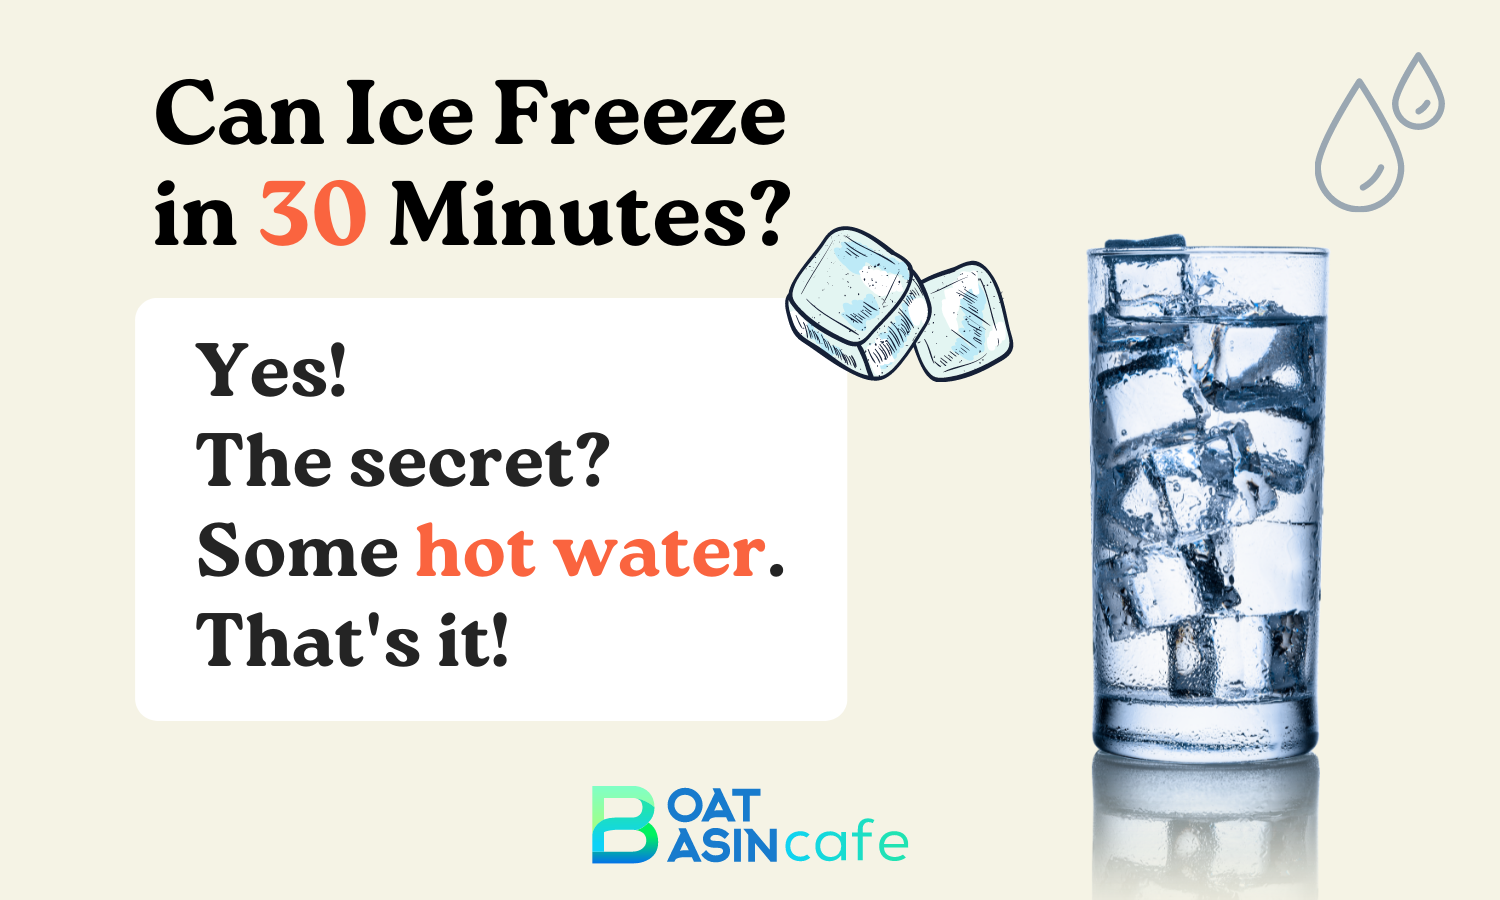 Can Ice Freeze in 30 Minutes?